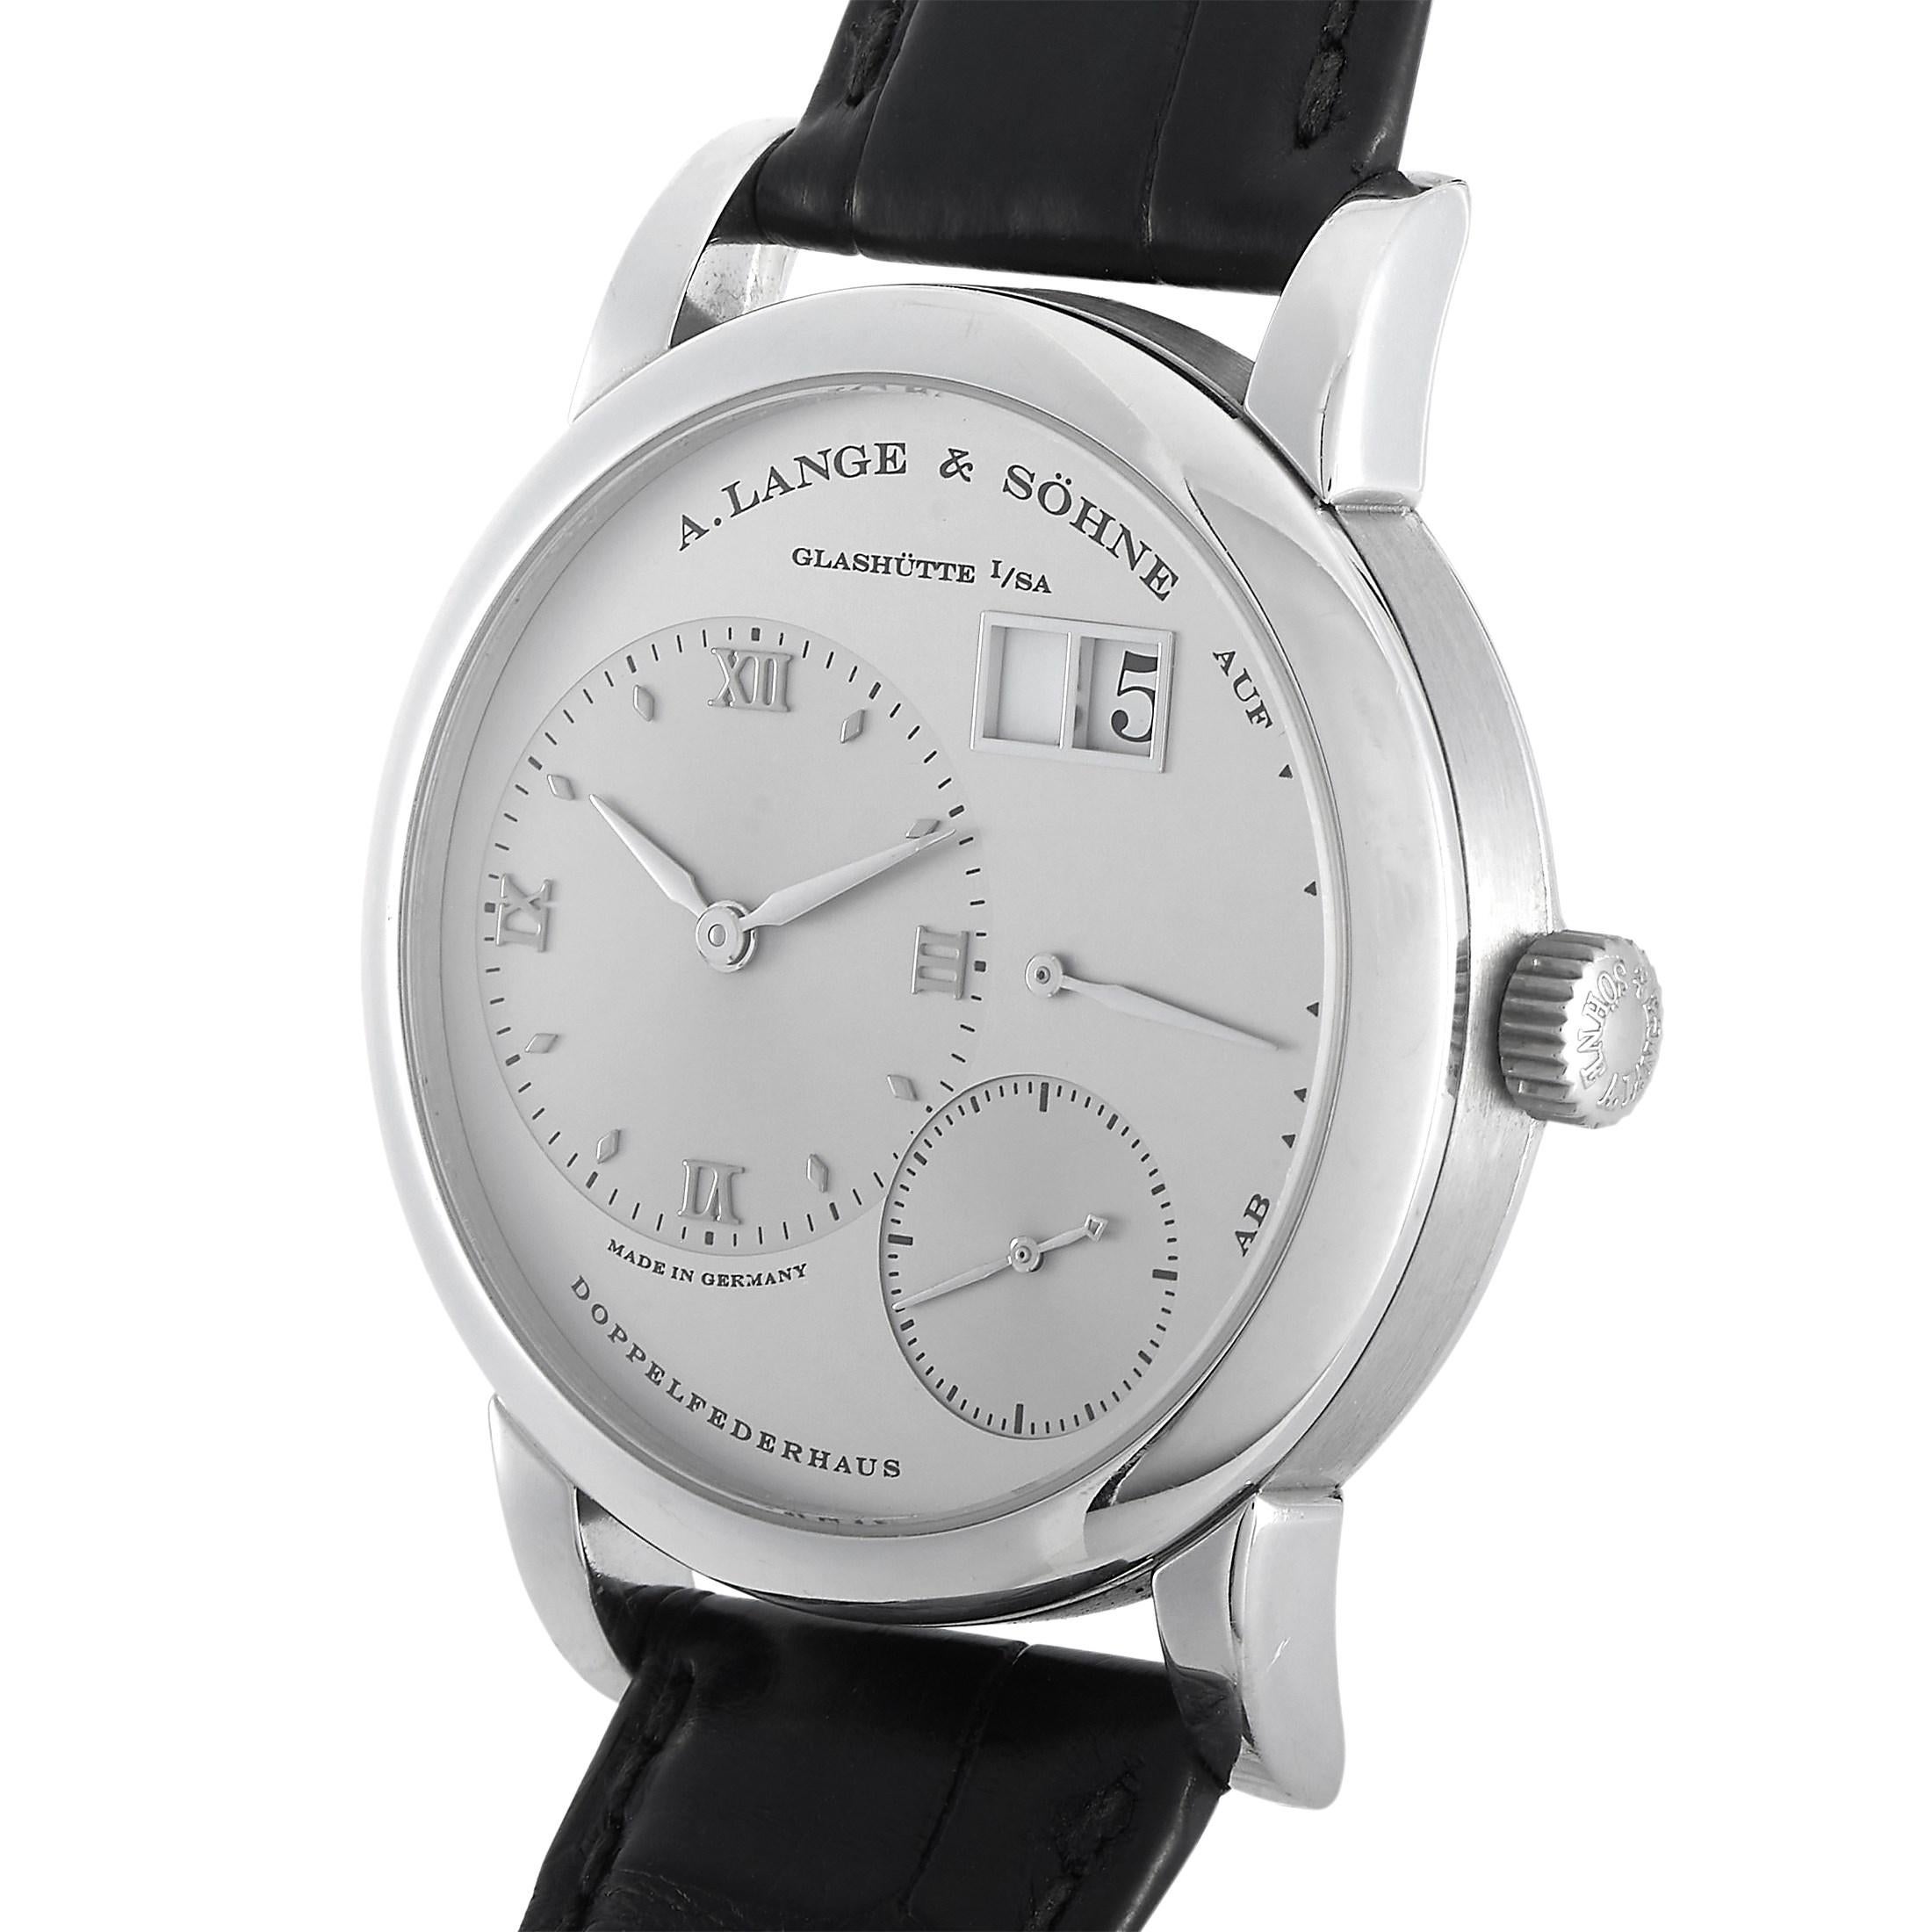 The A. Lange & Sohne Lange 1 Watch, reference number 191.025, is a luxury timepiece that will never go out of style. 

The beauty of this watch begins with the 38.5mm platinum case. A creatively designed white dial includes a traditional watch face